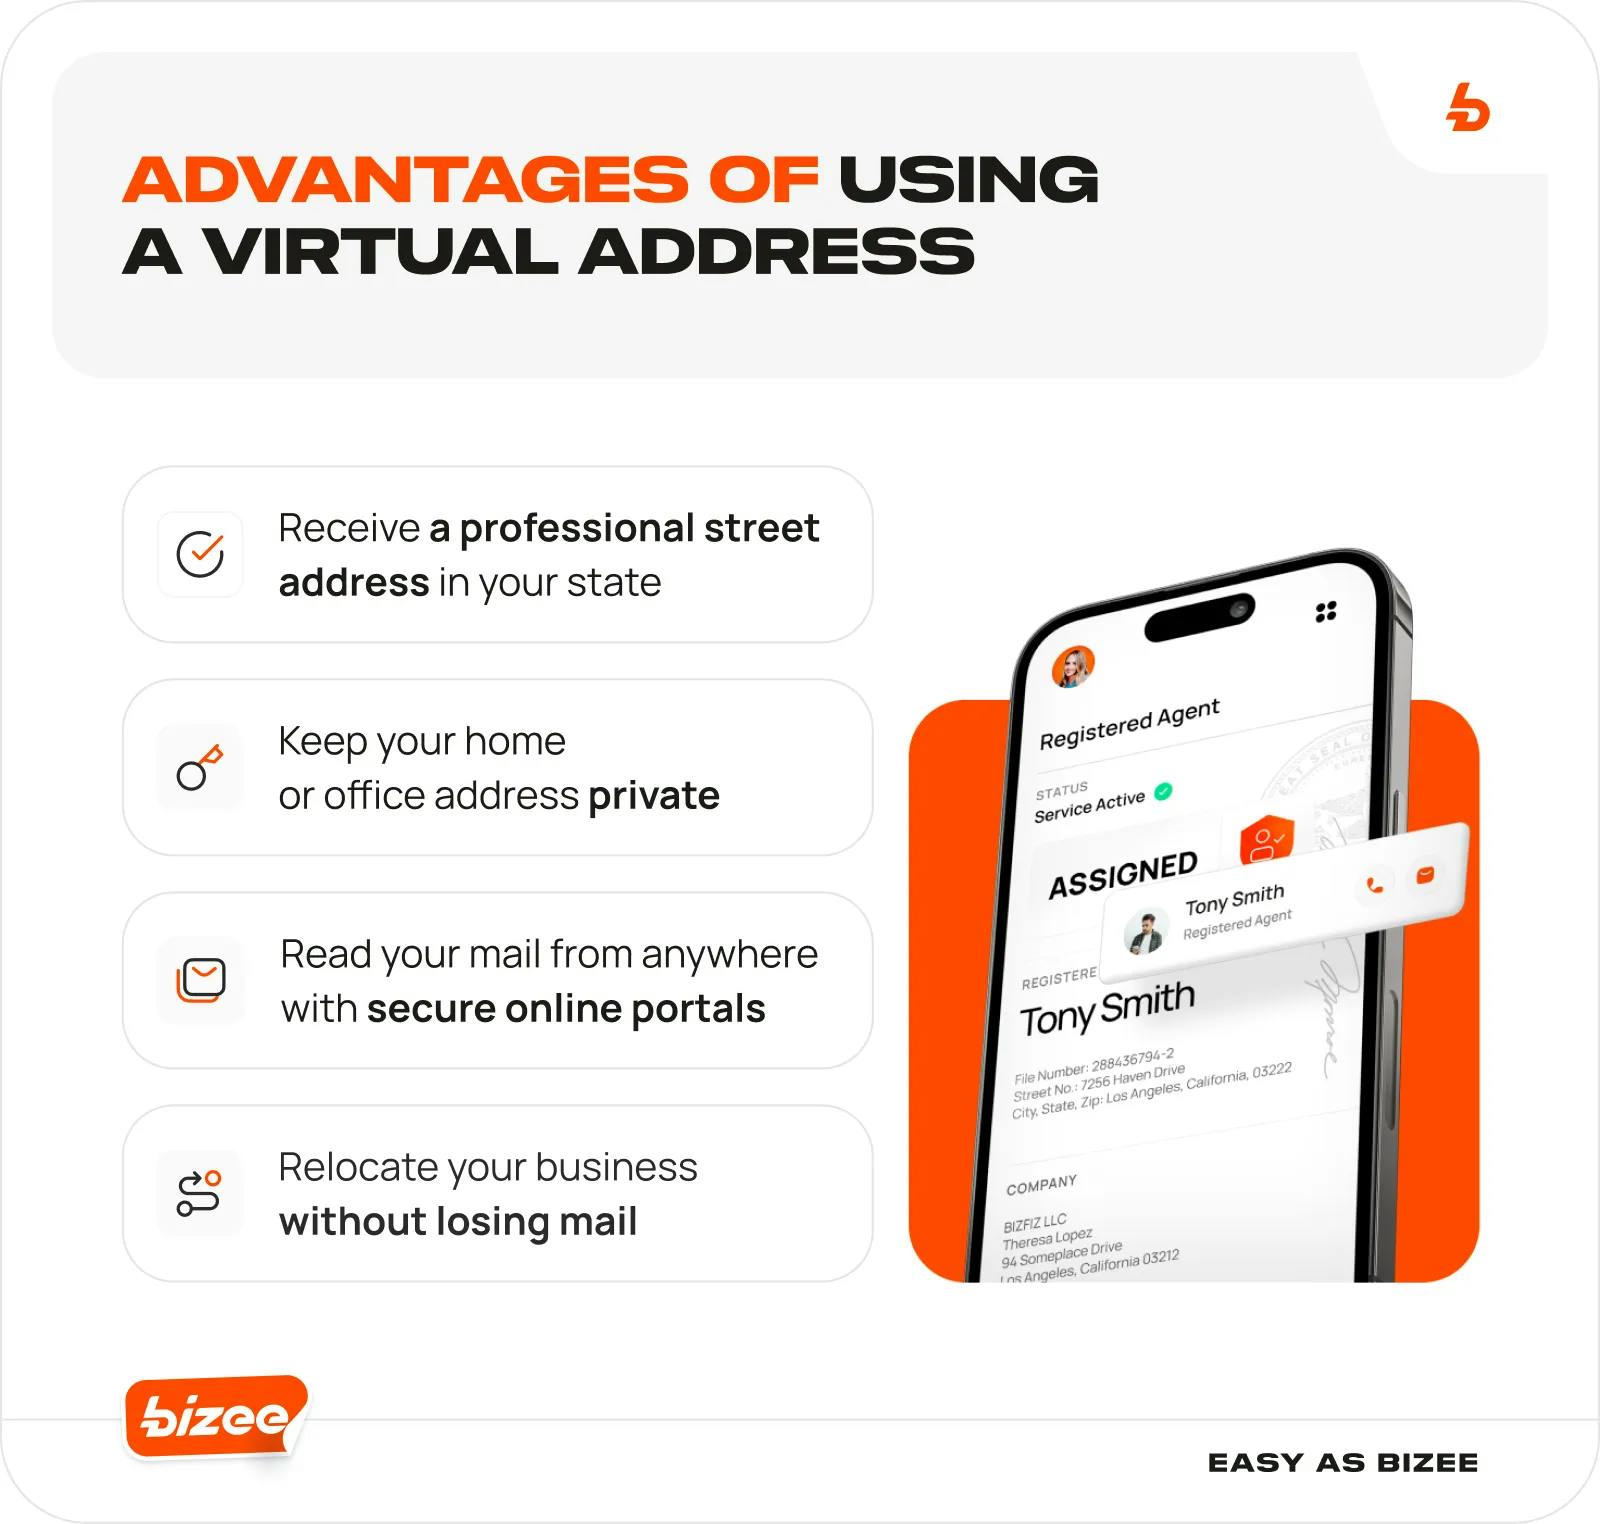 Advantages of using a virtual address infographic